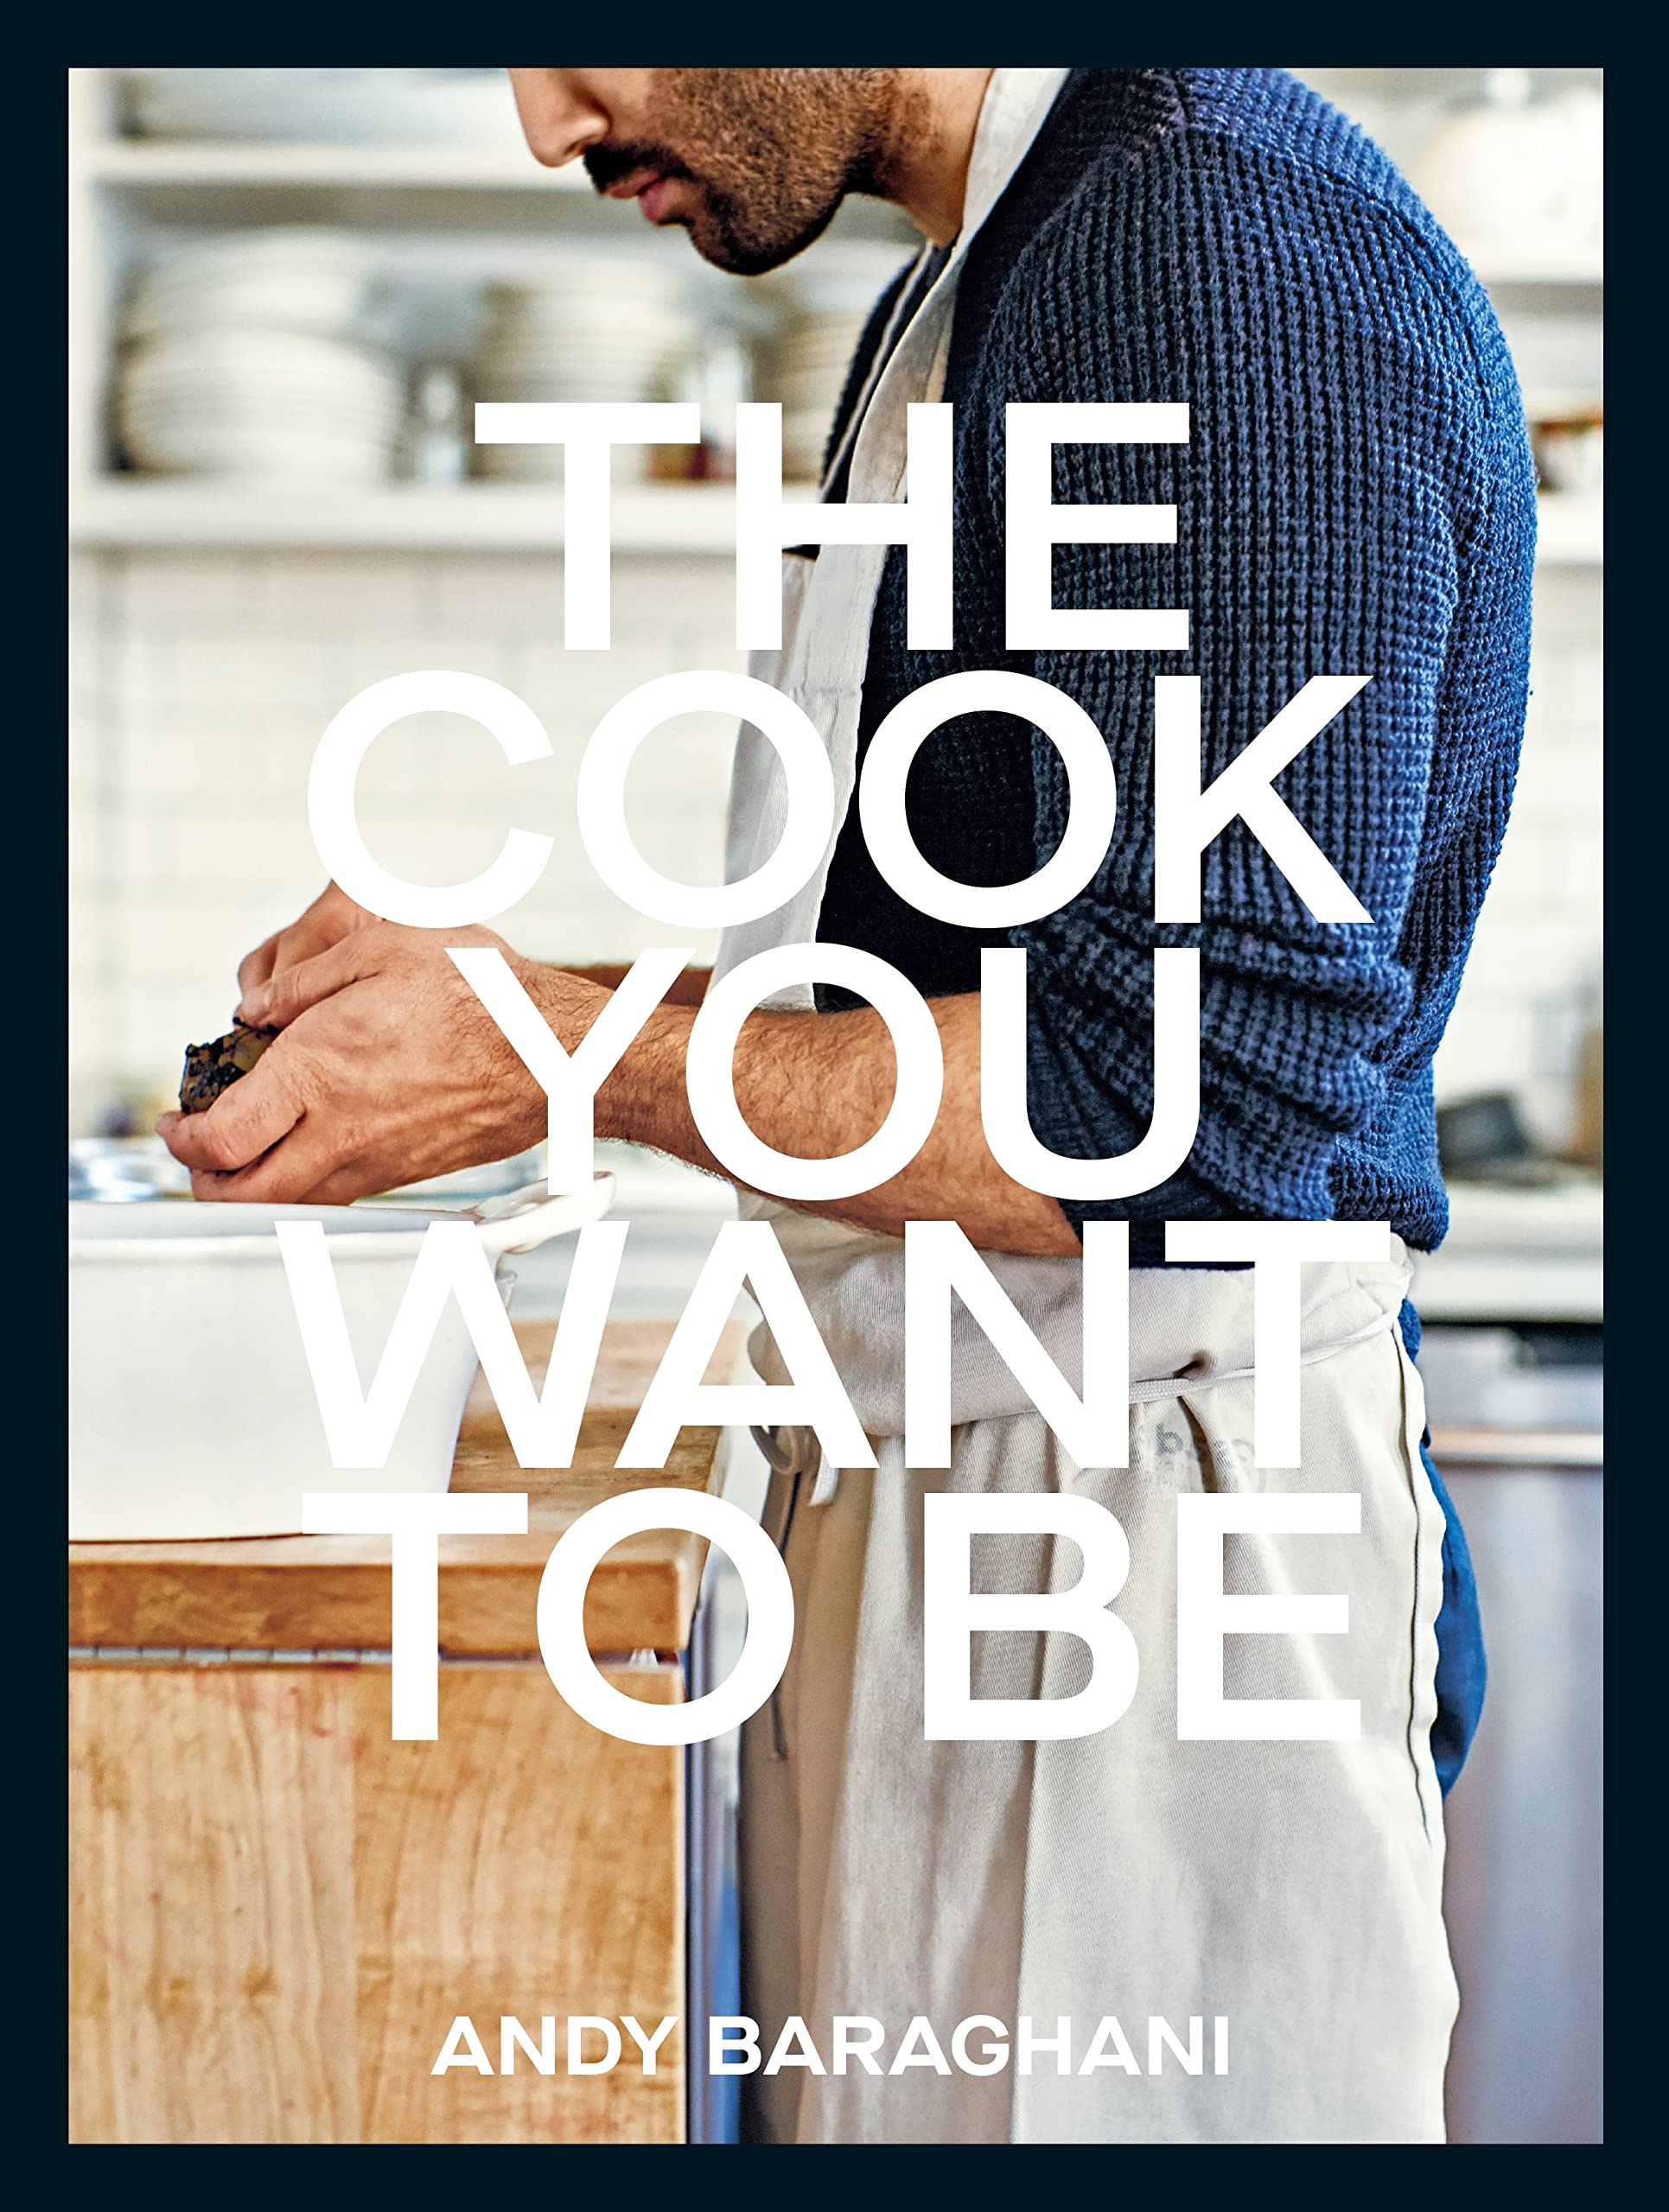 The Cook You Want To Be by Andy Baraghani